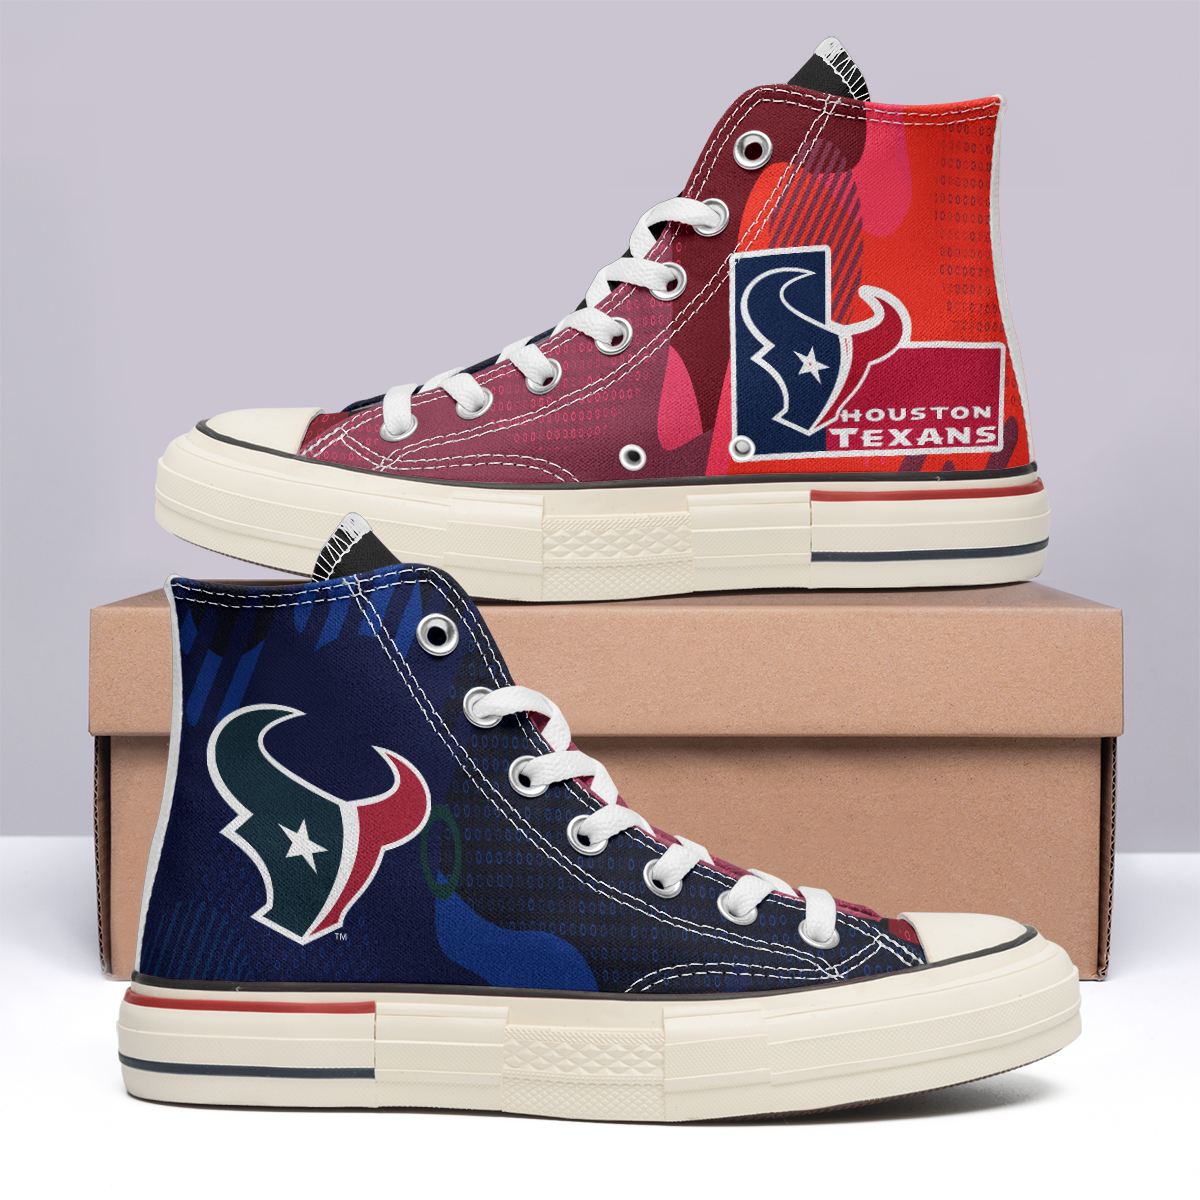 Houston Texans High Top Canvas Shoes Special Edition